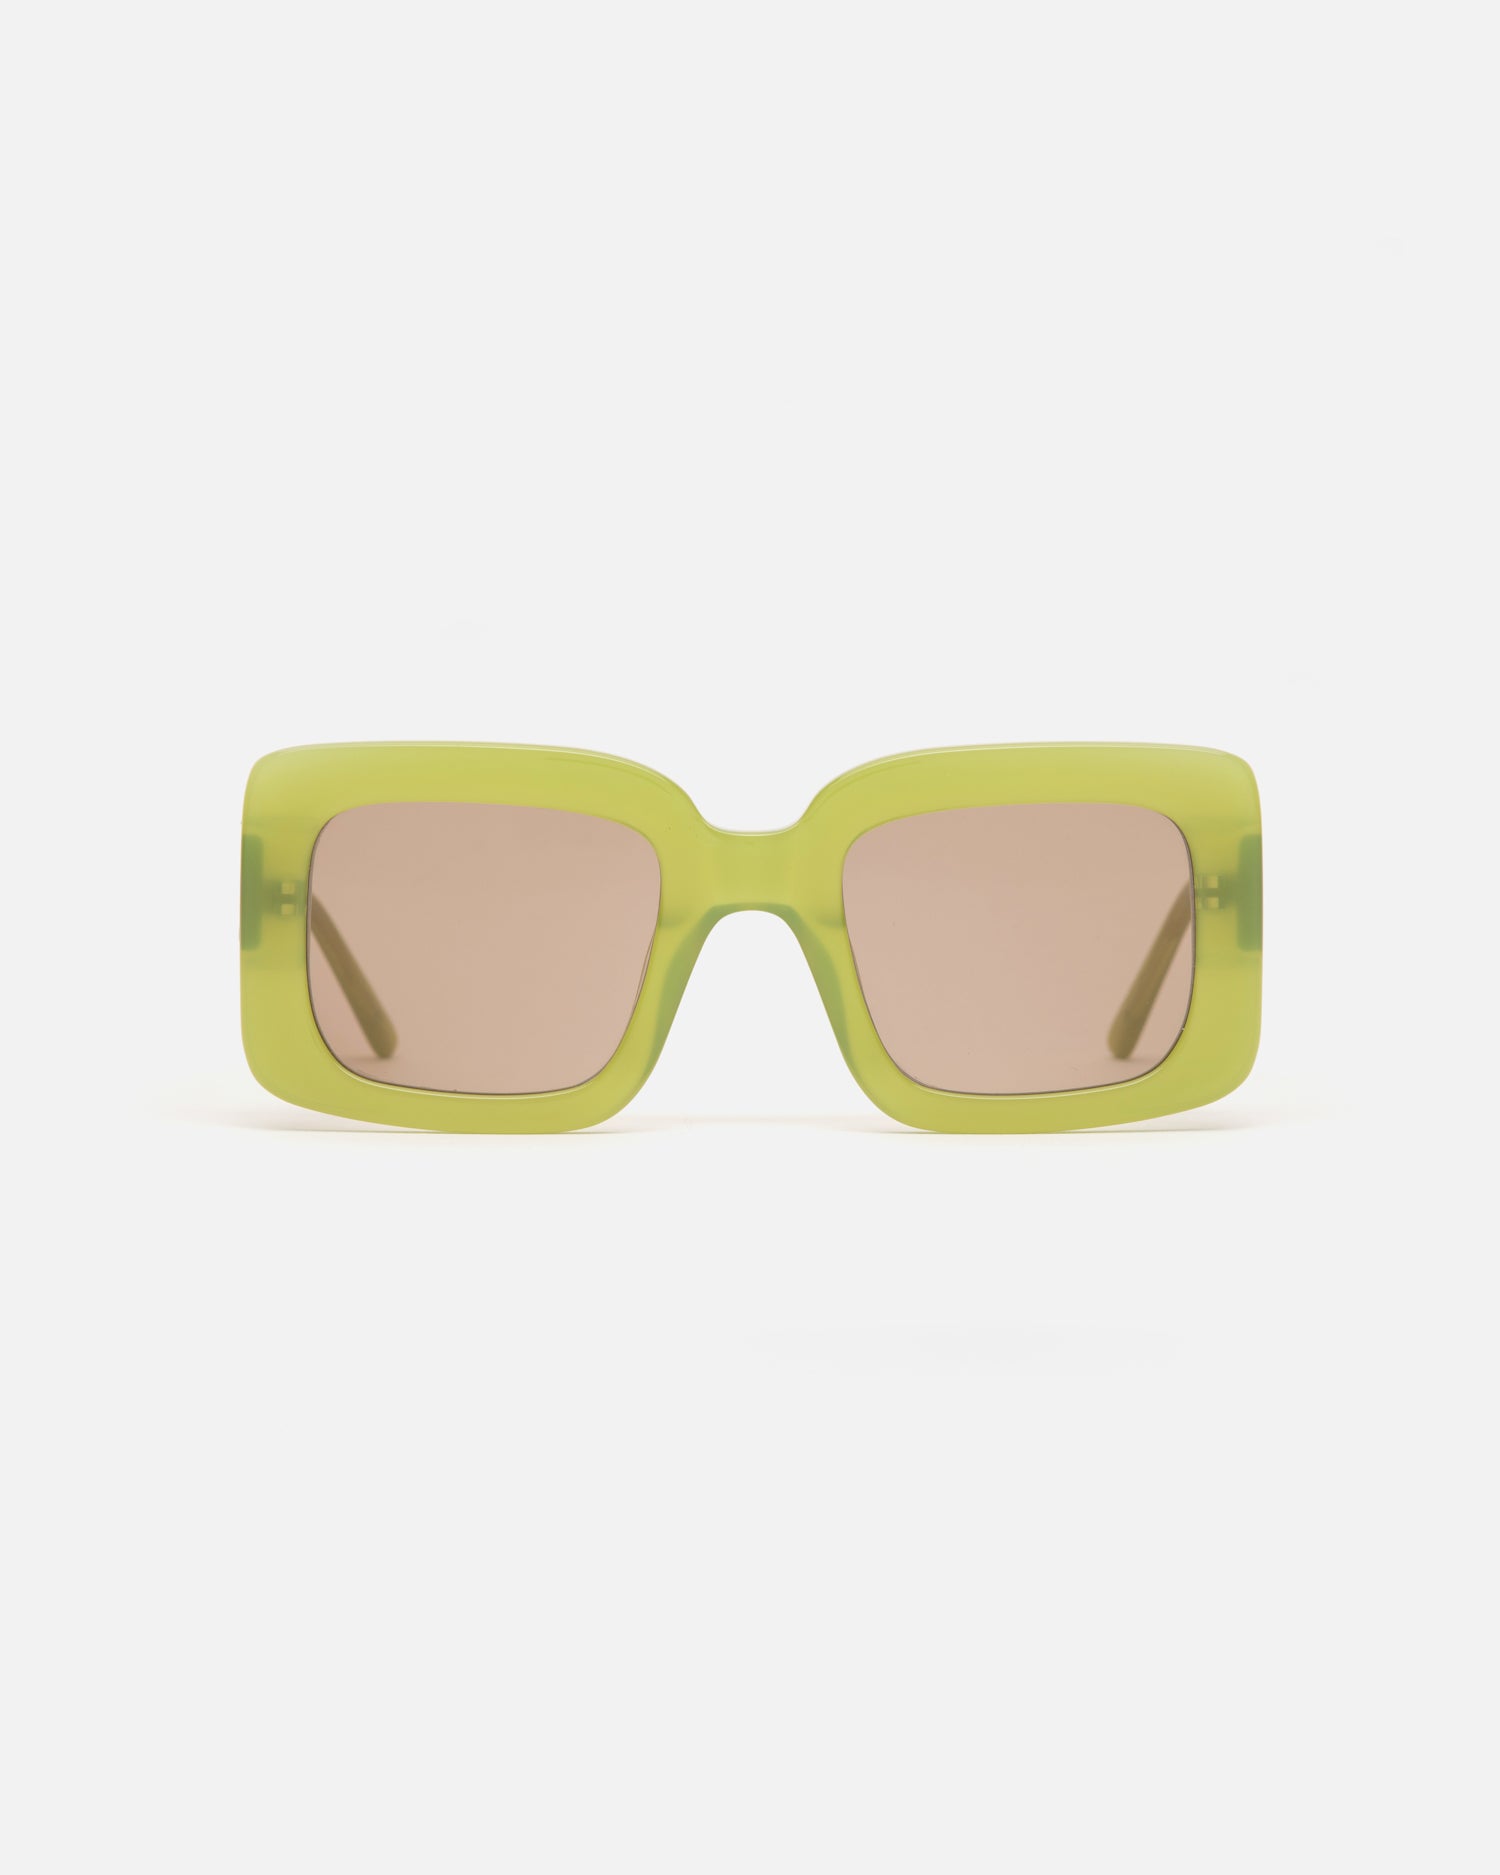 Lu Goldie Mia oversize square Sunglasses in leaf green acetate with tan brown lenses, front image